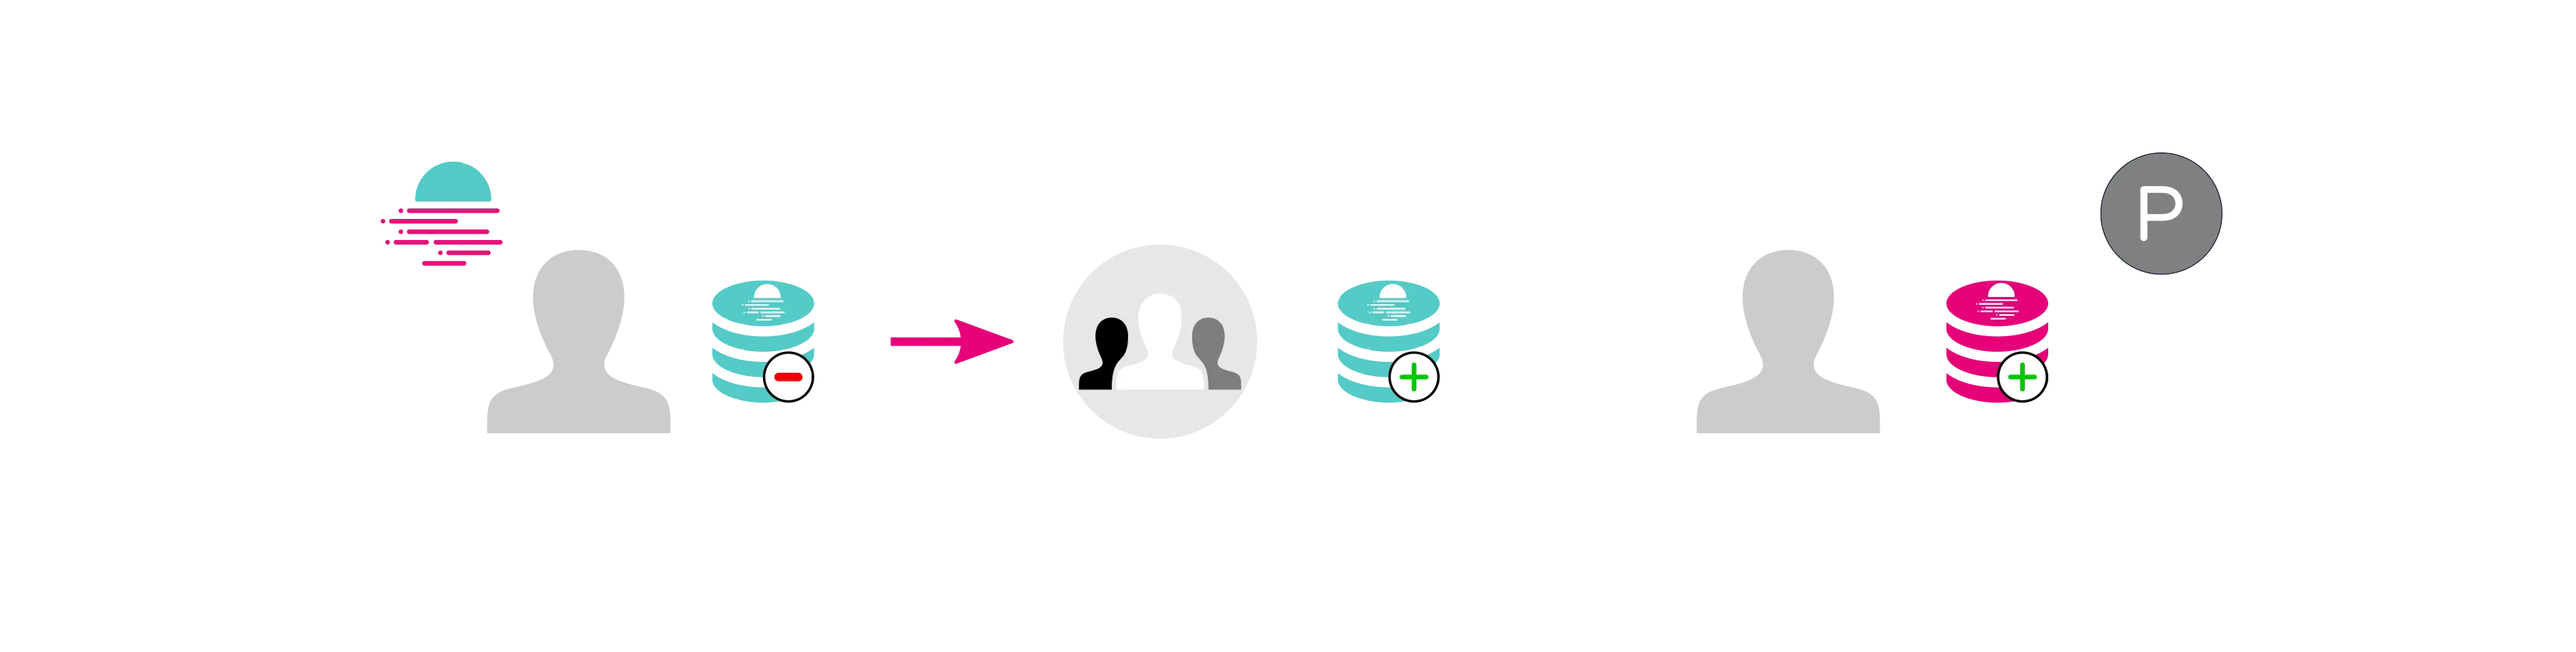 Transfers from Moonbeam to another Parachain